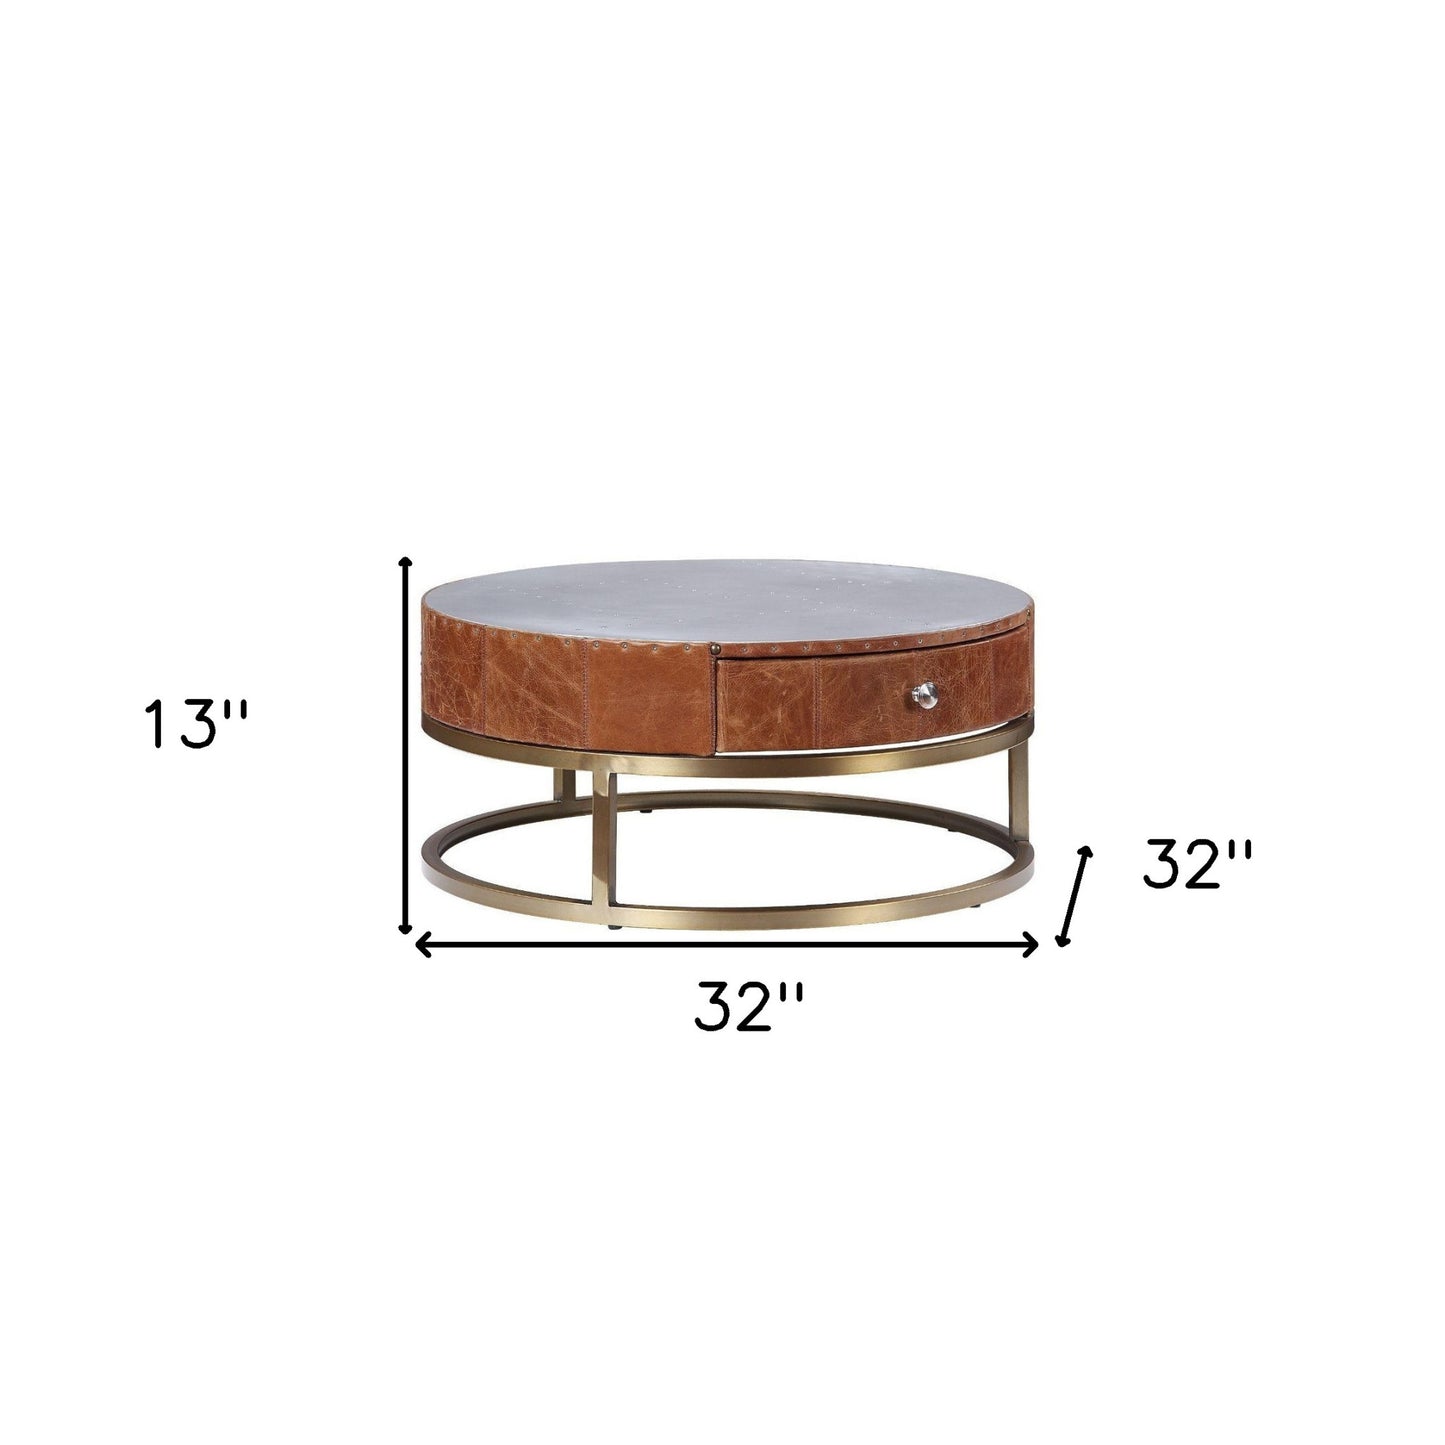 32" Cocoa And Silver Aluminum Round Coffee Table With Drawer By Homeroots